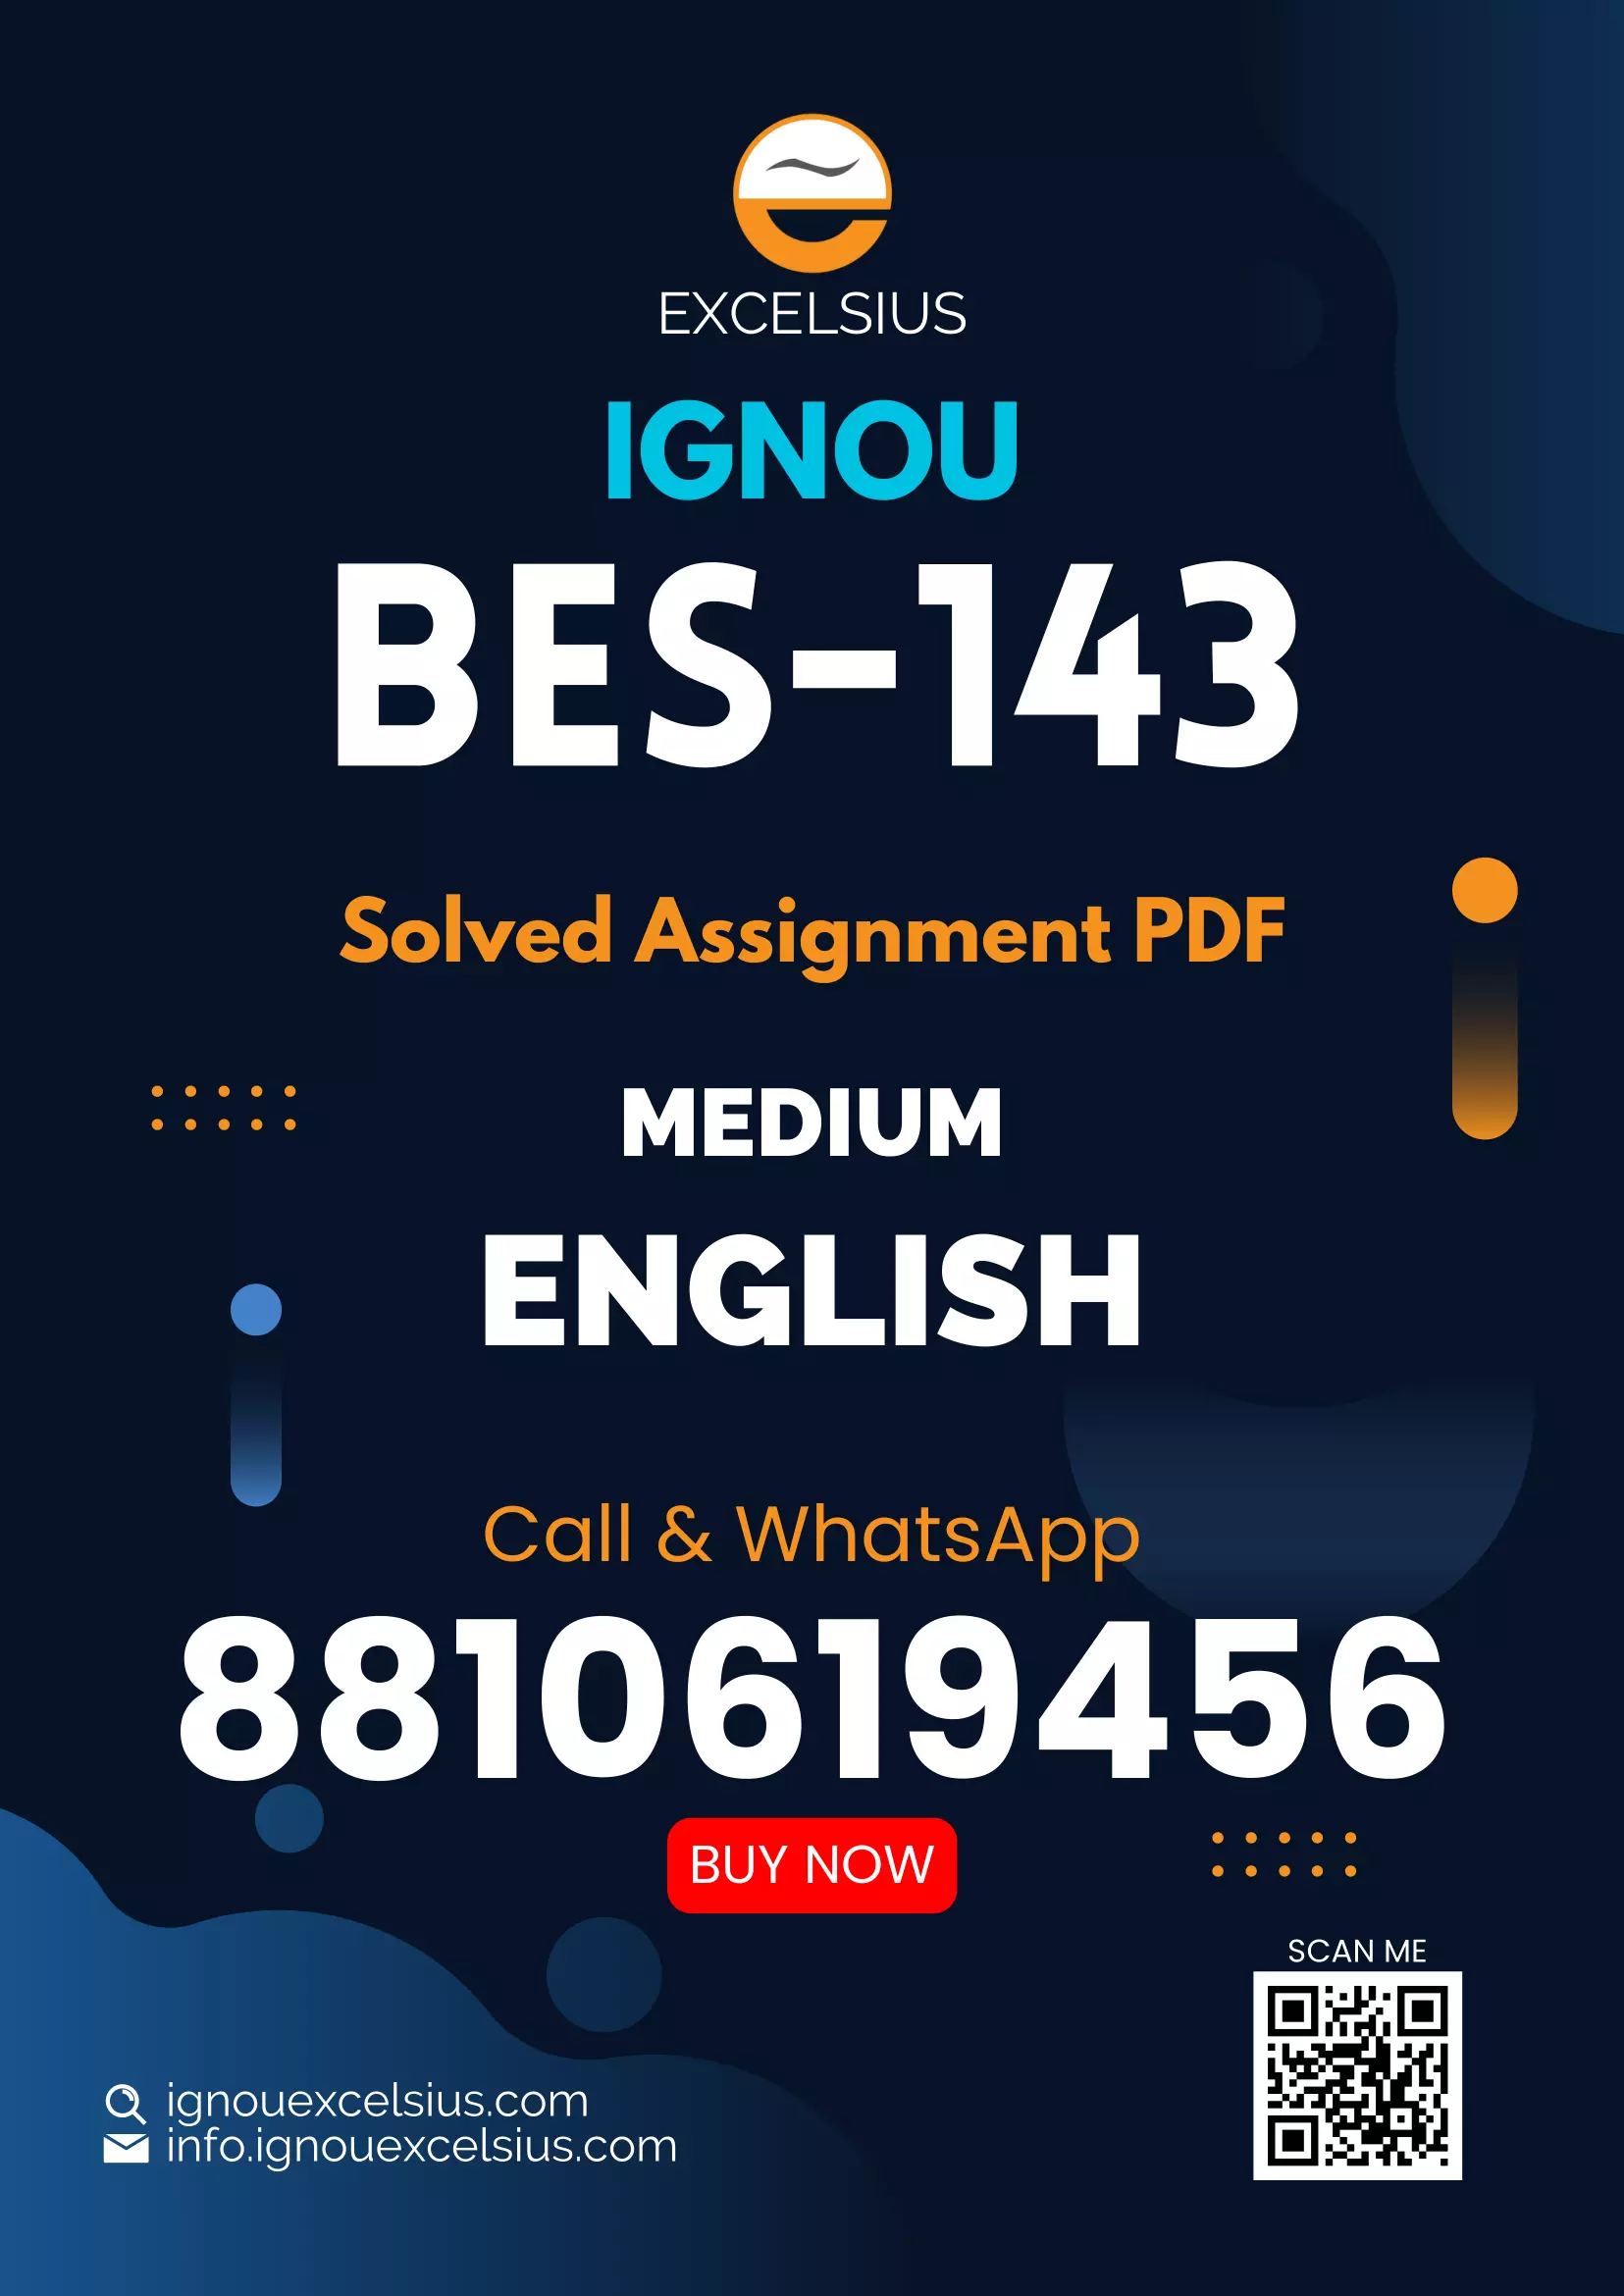 IGNOU BES-143 - Pedagogy of Mathematics, Latest Solved Assignment-January 2021 - July 2021